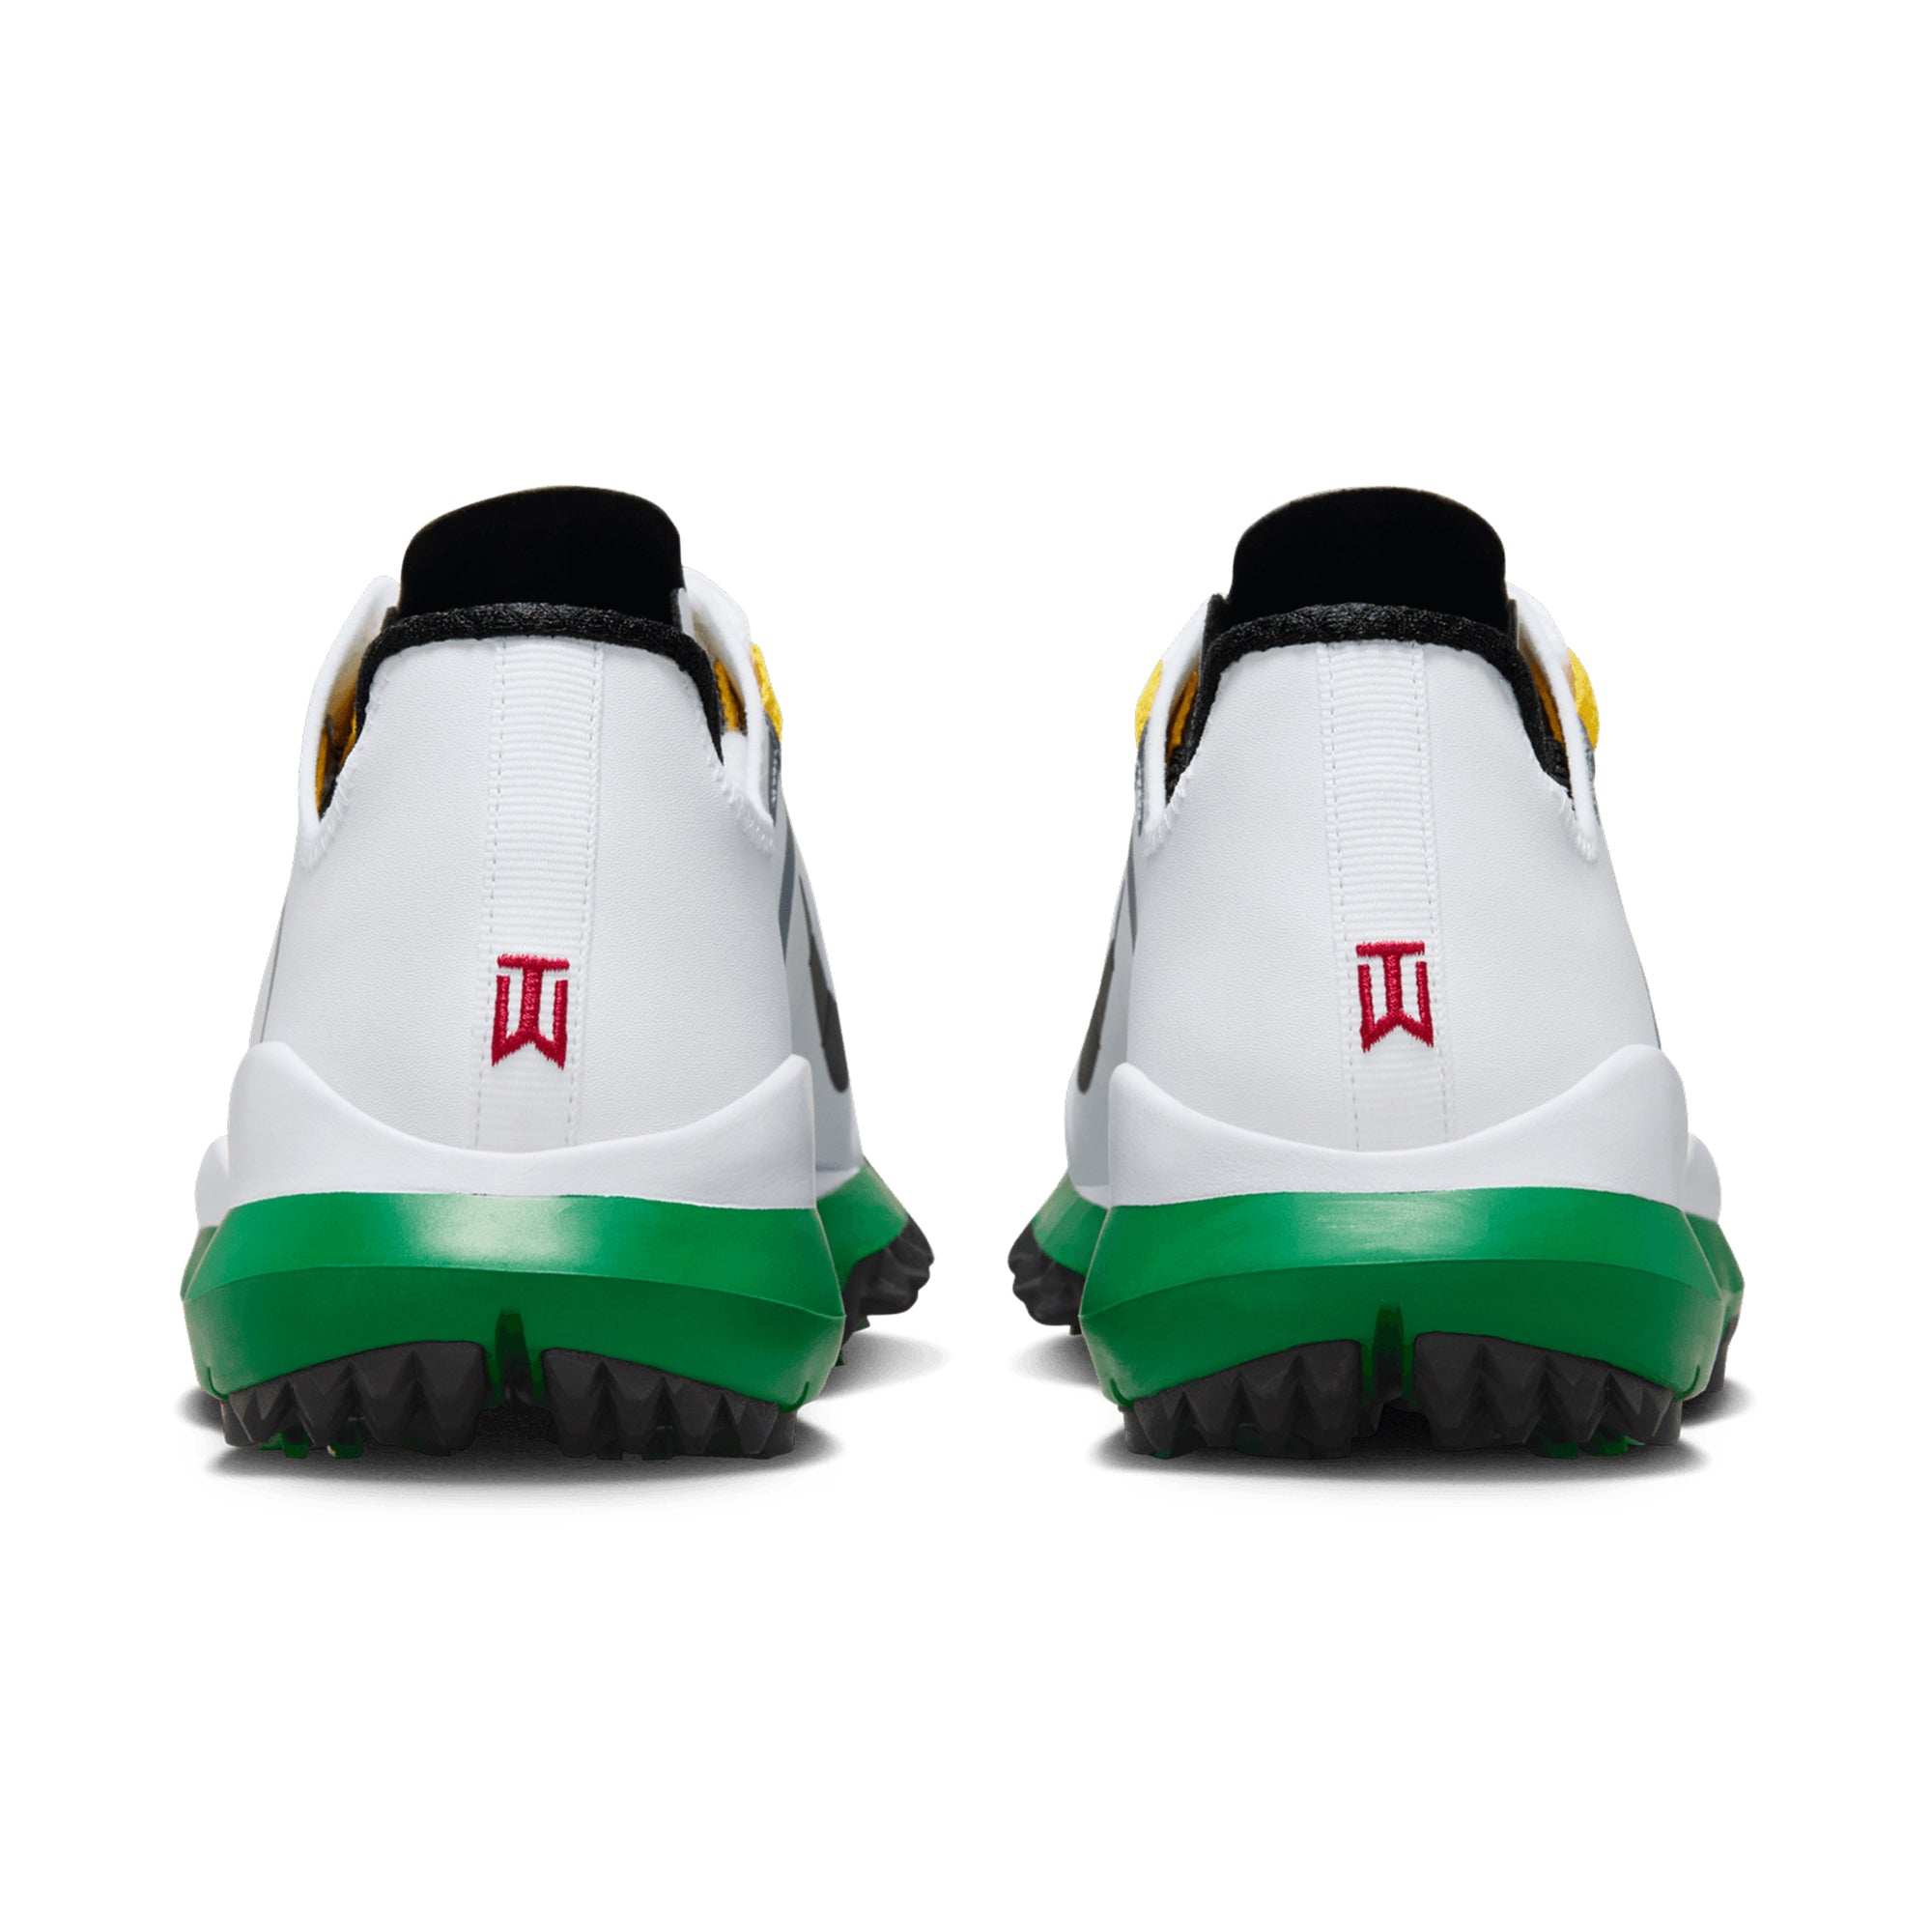 nike-golf-tw-13-shoes